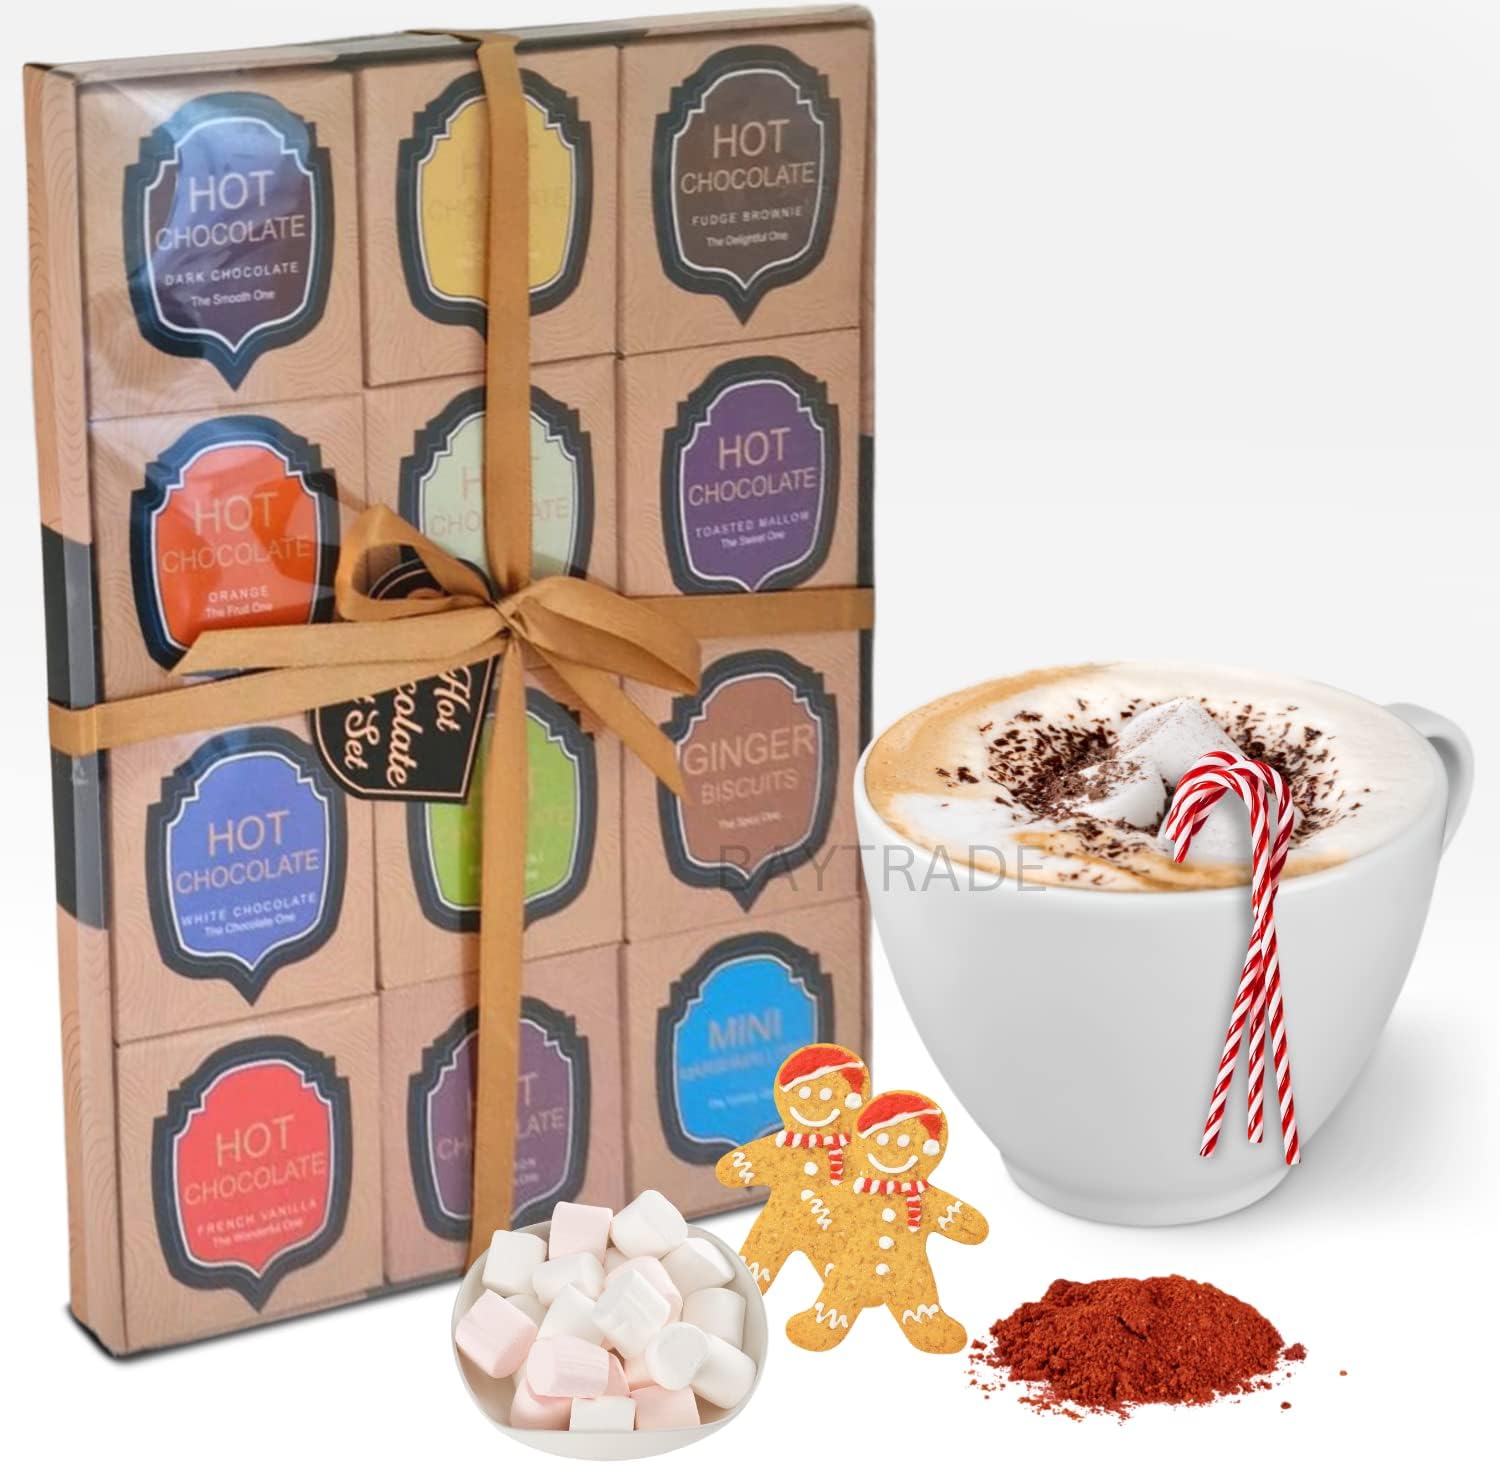 Hot Chocolate Gift Set | 12 Days of Christmas Cocoa Flavours Luxury Drinking Chocolate Sachets Mini Gift Boxes Gingerbread Men Biscuits Marshmallows House Christmas Gifts for Couples Women Men Kids